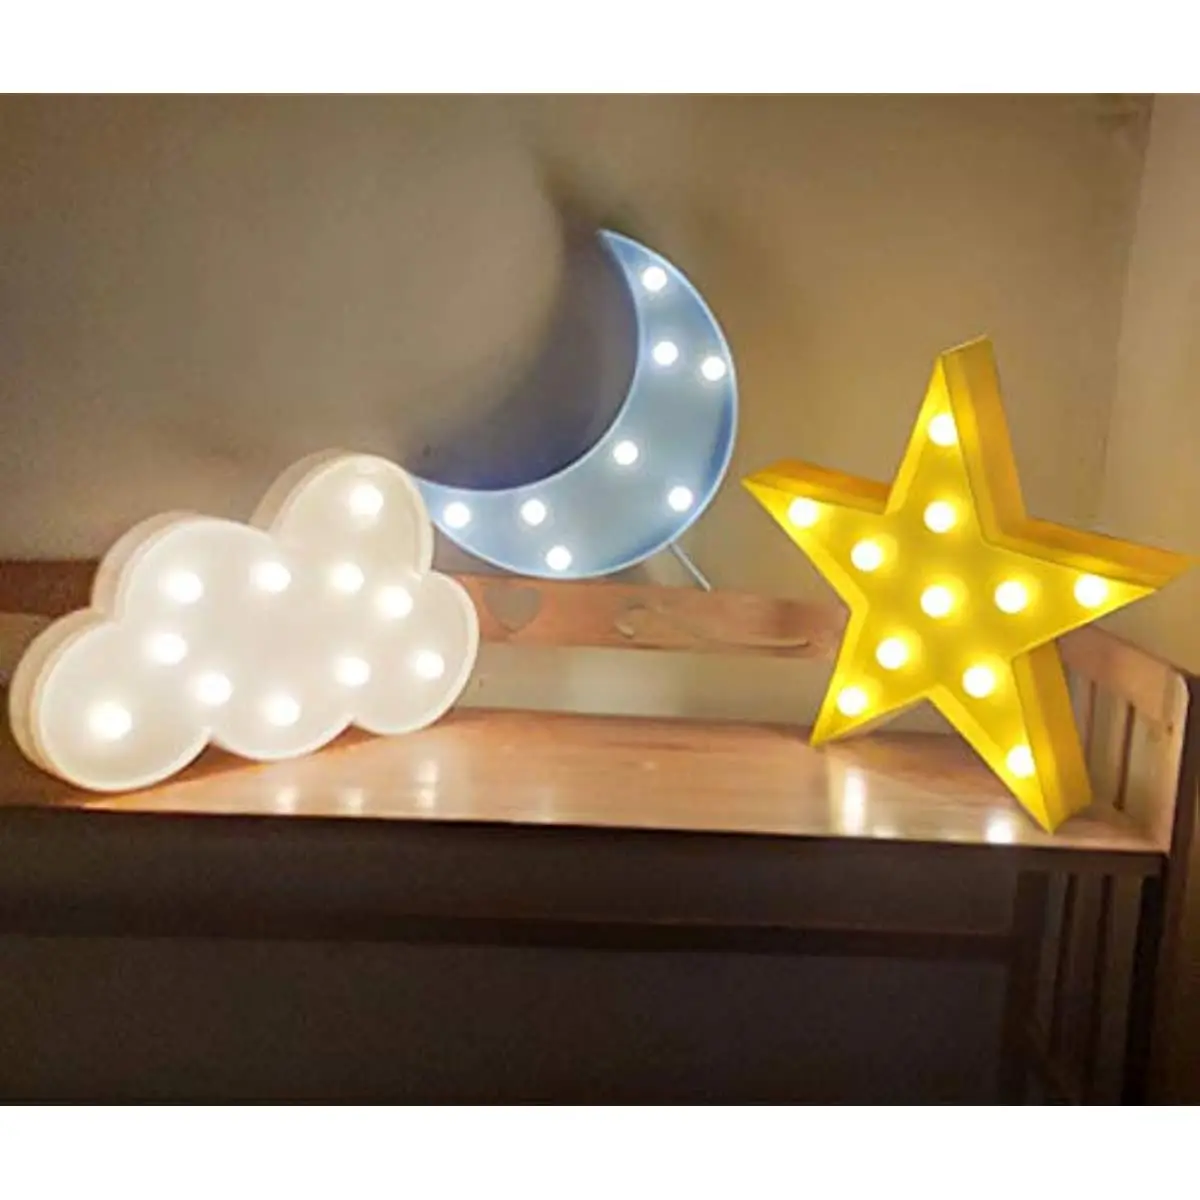 3PCS Decorative LED Night Lights Crescent Moon Star Cloud Lamp Sign Light Room Decor for Baby Kids Children Adults Gifts